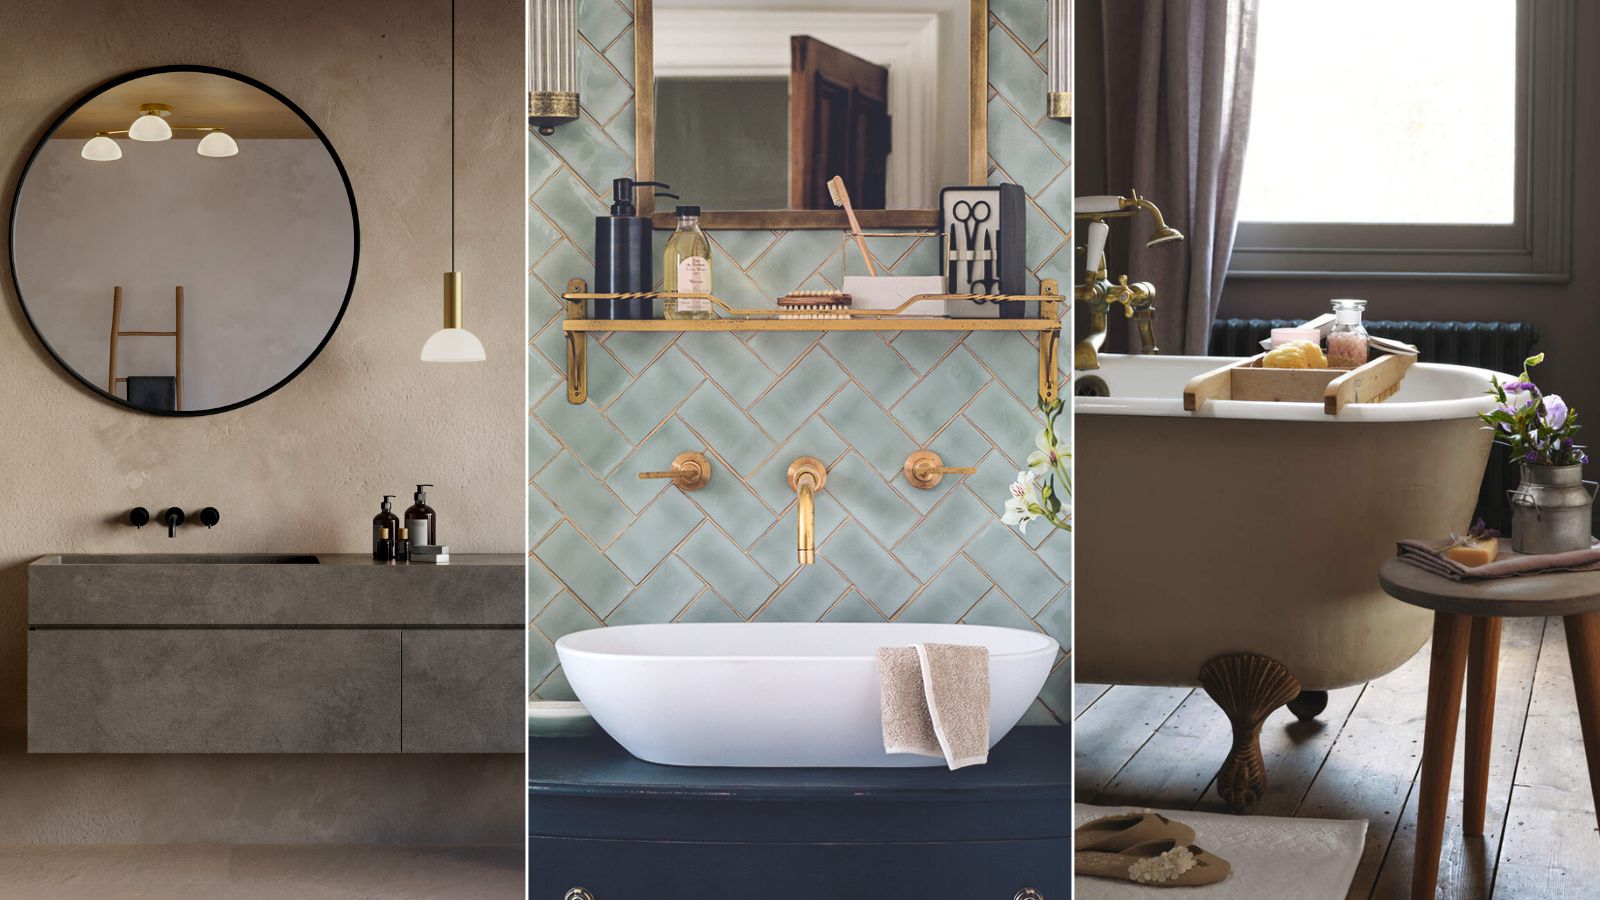 Check Out This Gorgeous Neutral Bathroom Makeover! - Postbox Designs